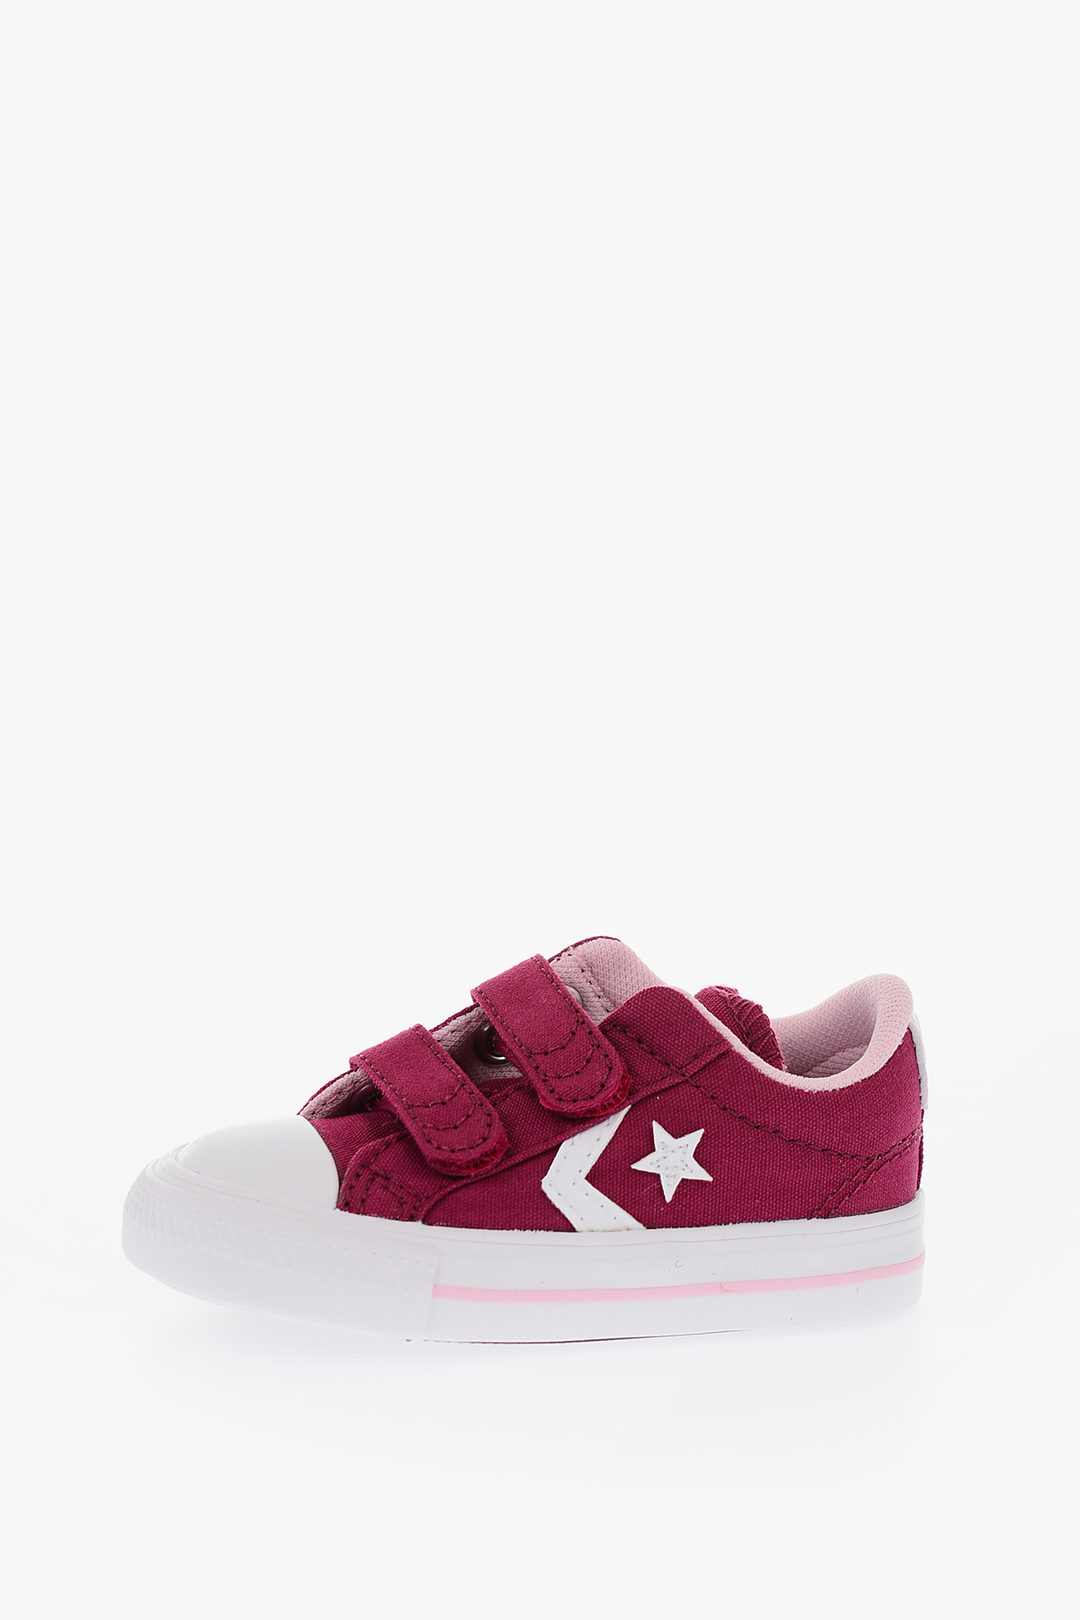 Bestuiven Conventie Geavanceerd Converse KIDS ALL STAR Sneakers with Touch Strap Closure girls - Glamood  Outlet